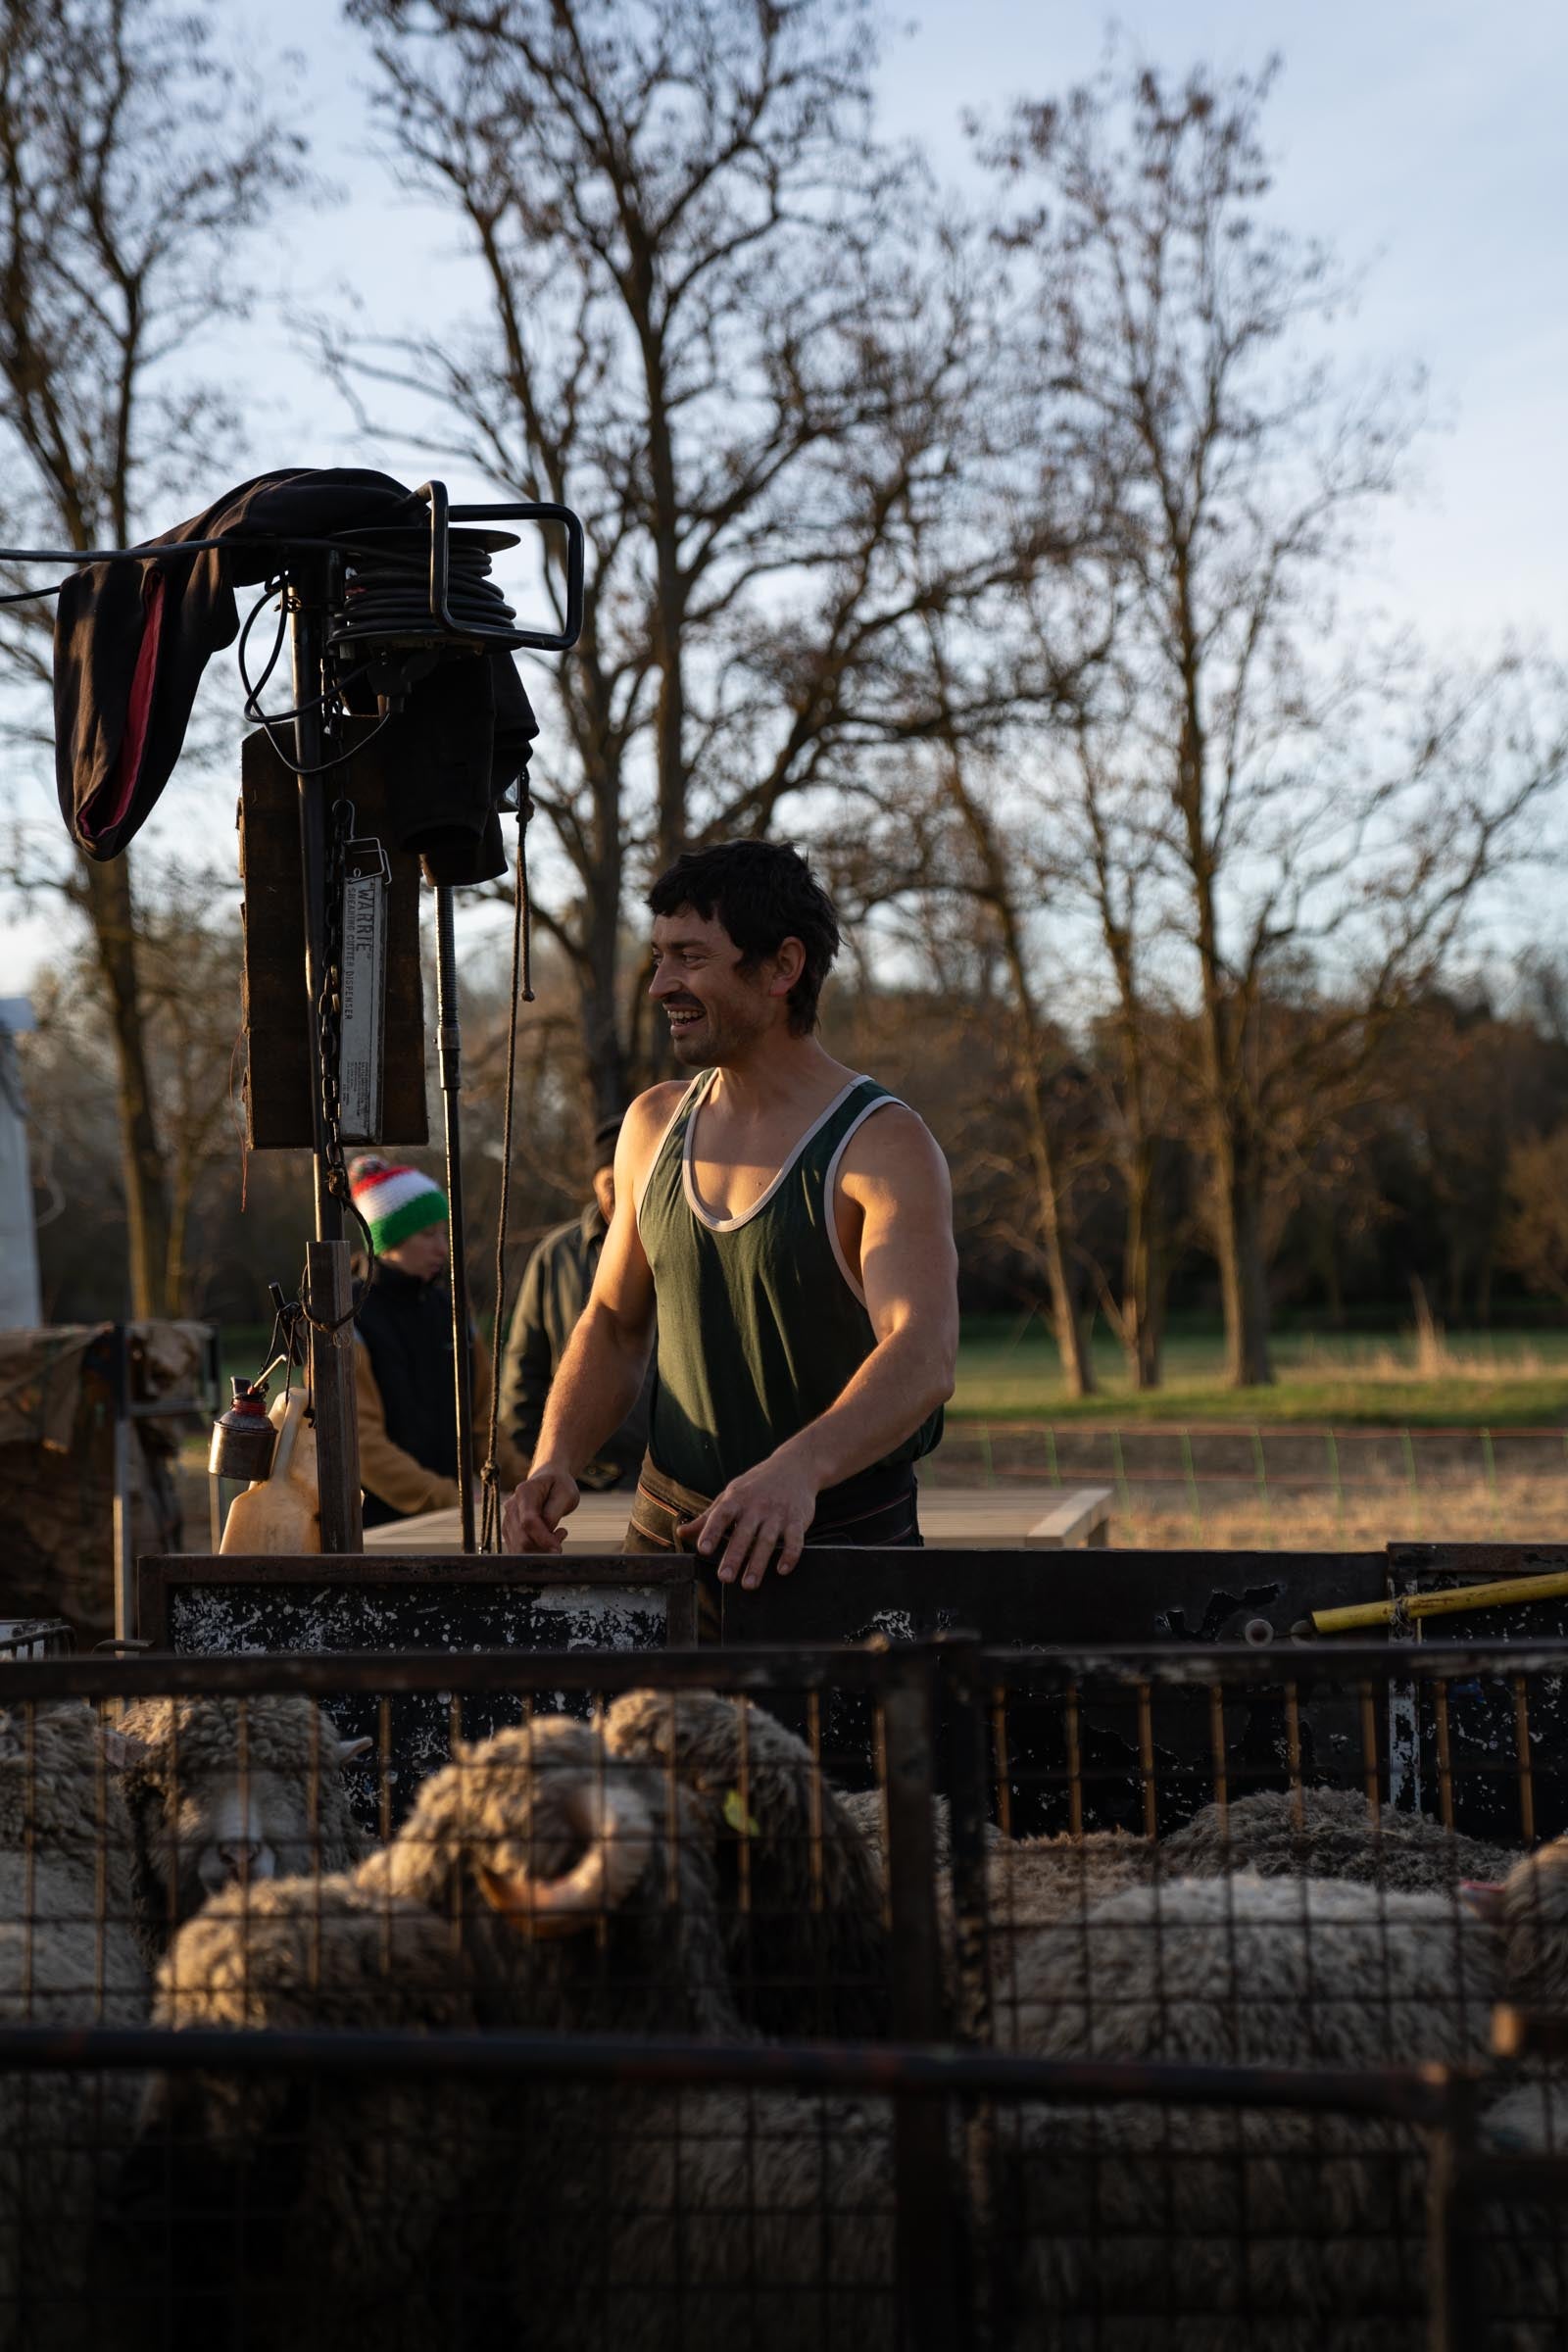 A shearer in the morning sun, preparing to take the first sheep from the pen for shearing.